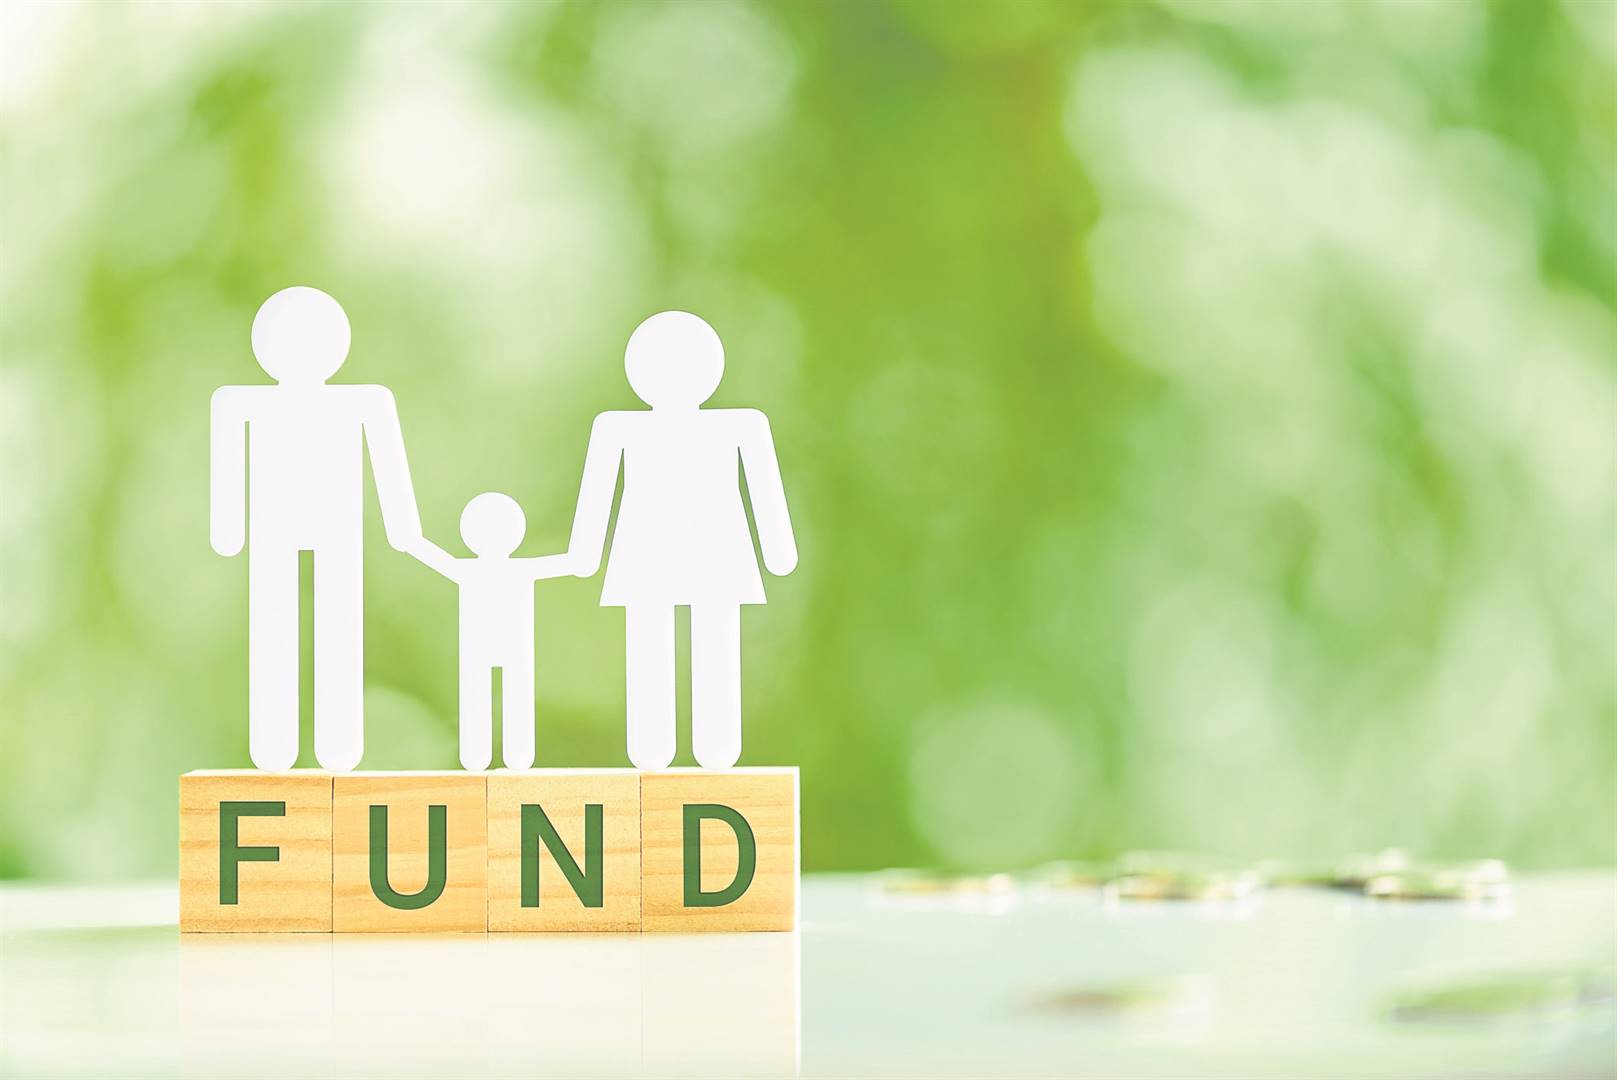 If your child remains financially dependent on you when they are an adult, you will need to consider this as part of your long-term financial plan. 